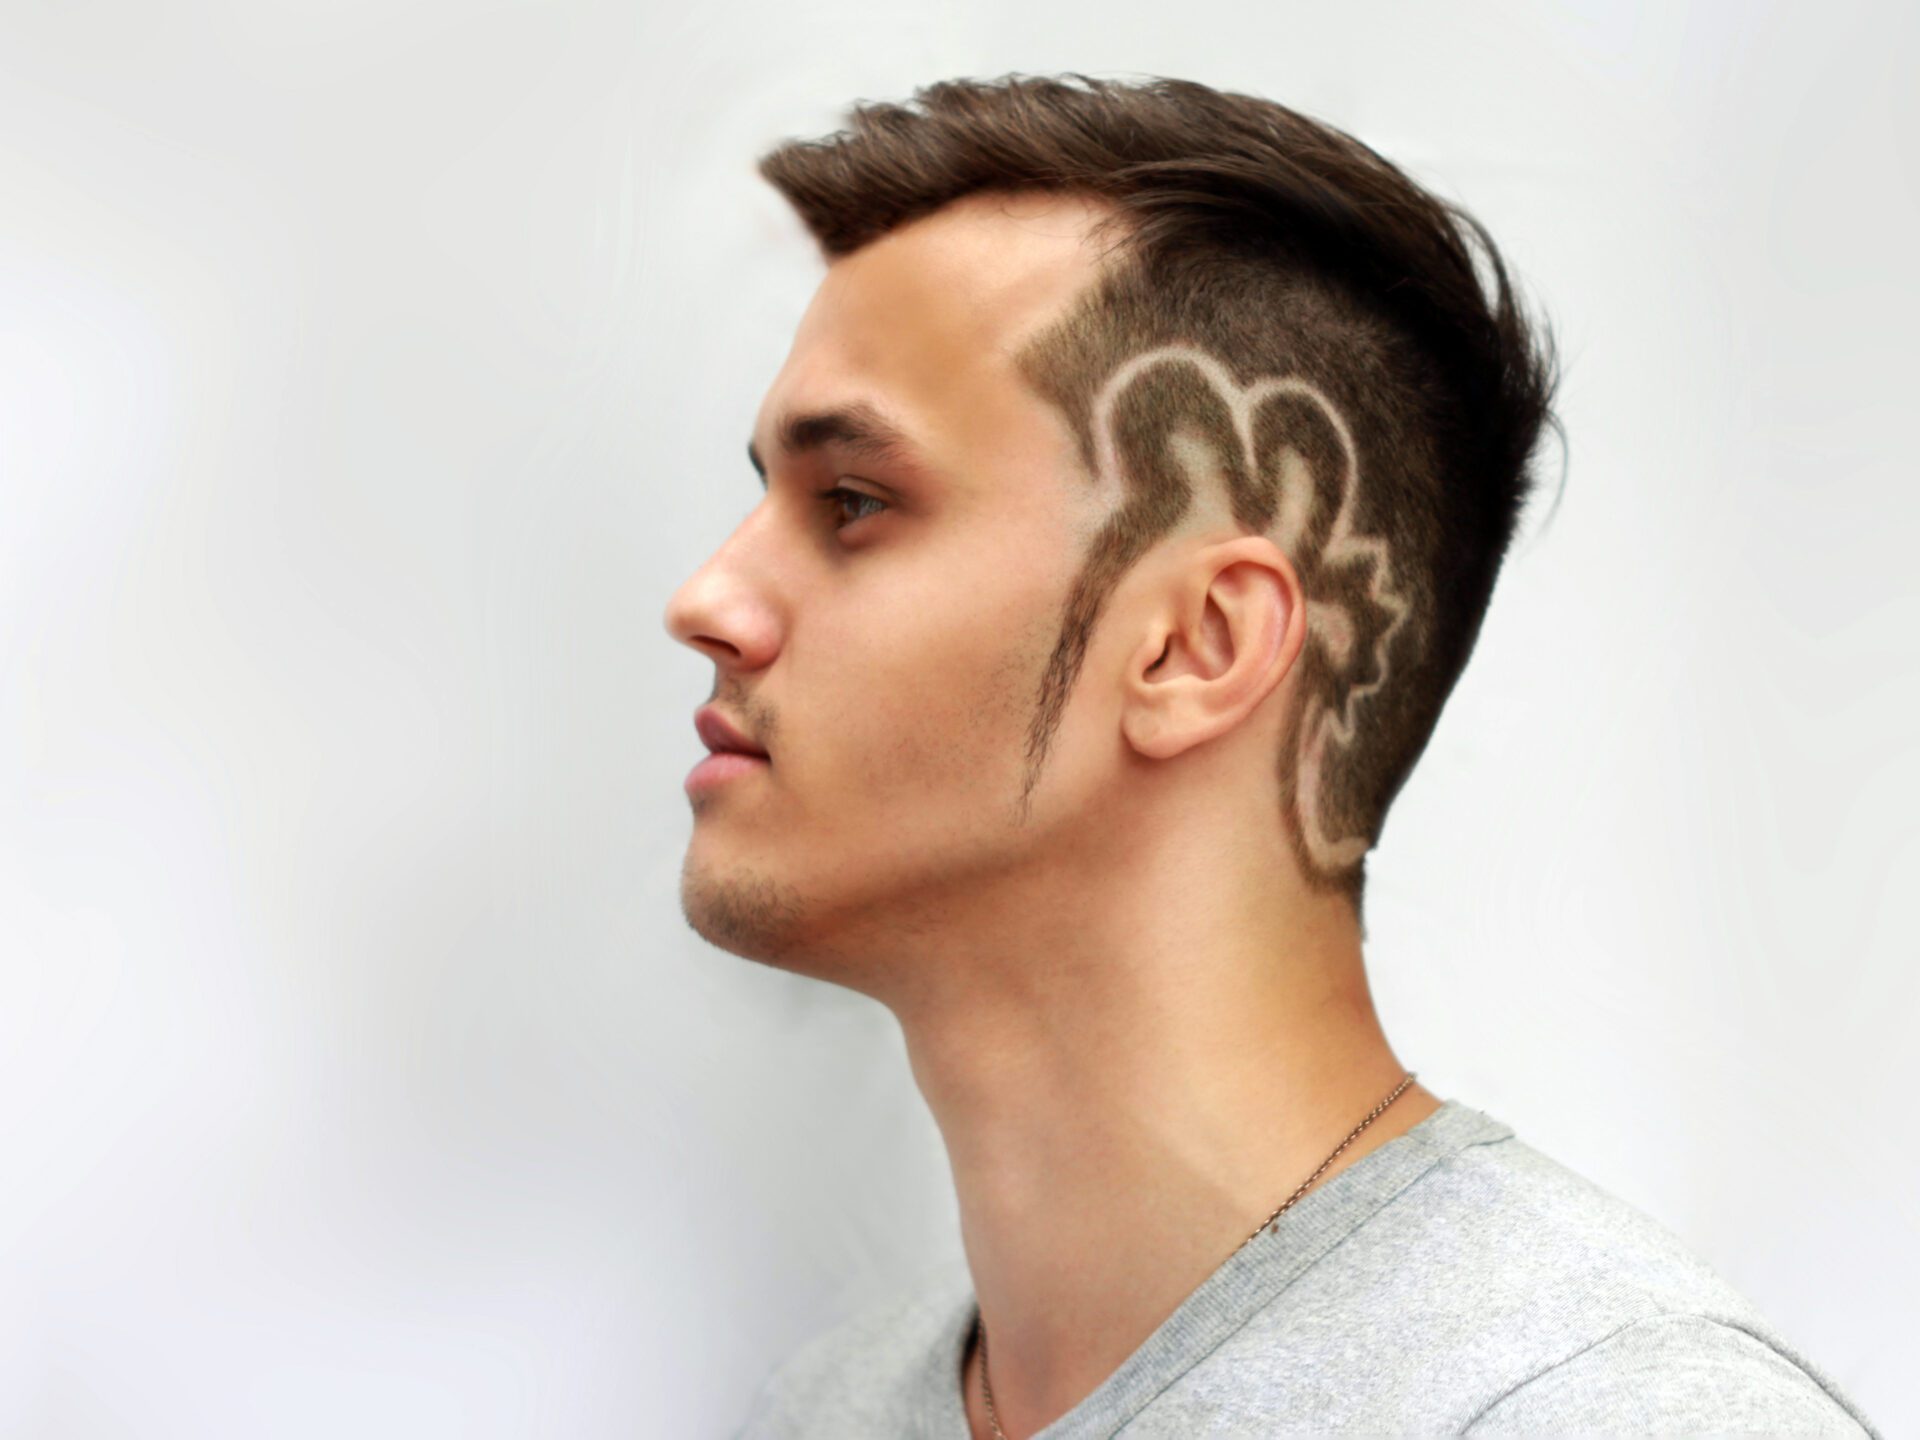 Tomahawk Salon on X Girl With A Dragon Tattoo inspired haircut photo  courtesy of our client Cut by KristinJackson hairinspo hairstyle  shorthair tomahawksalon httpstco0wtpBheqWW  X